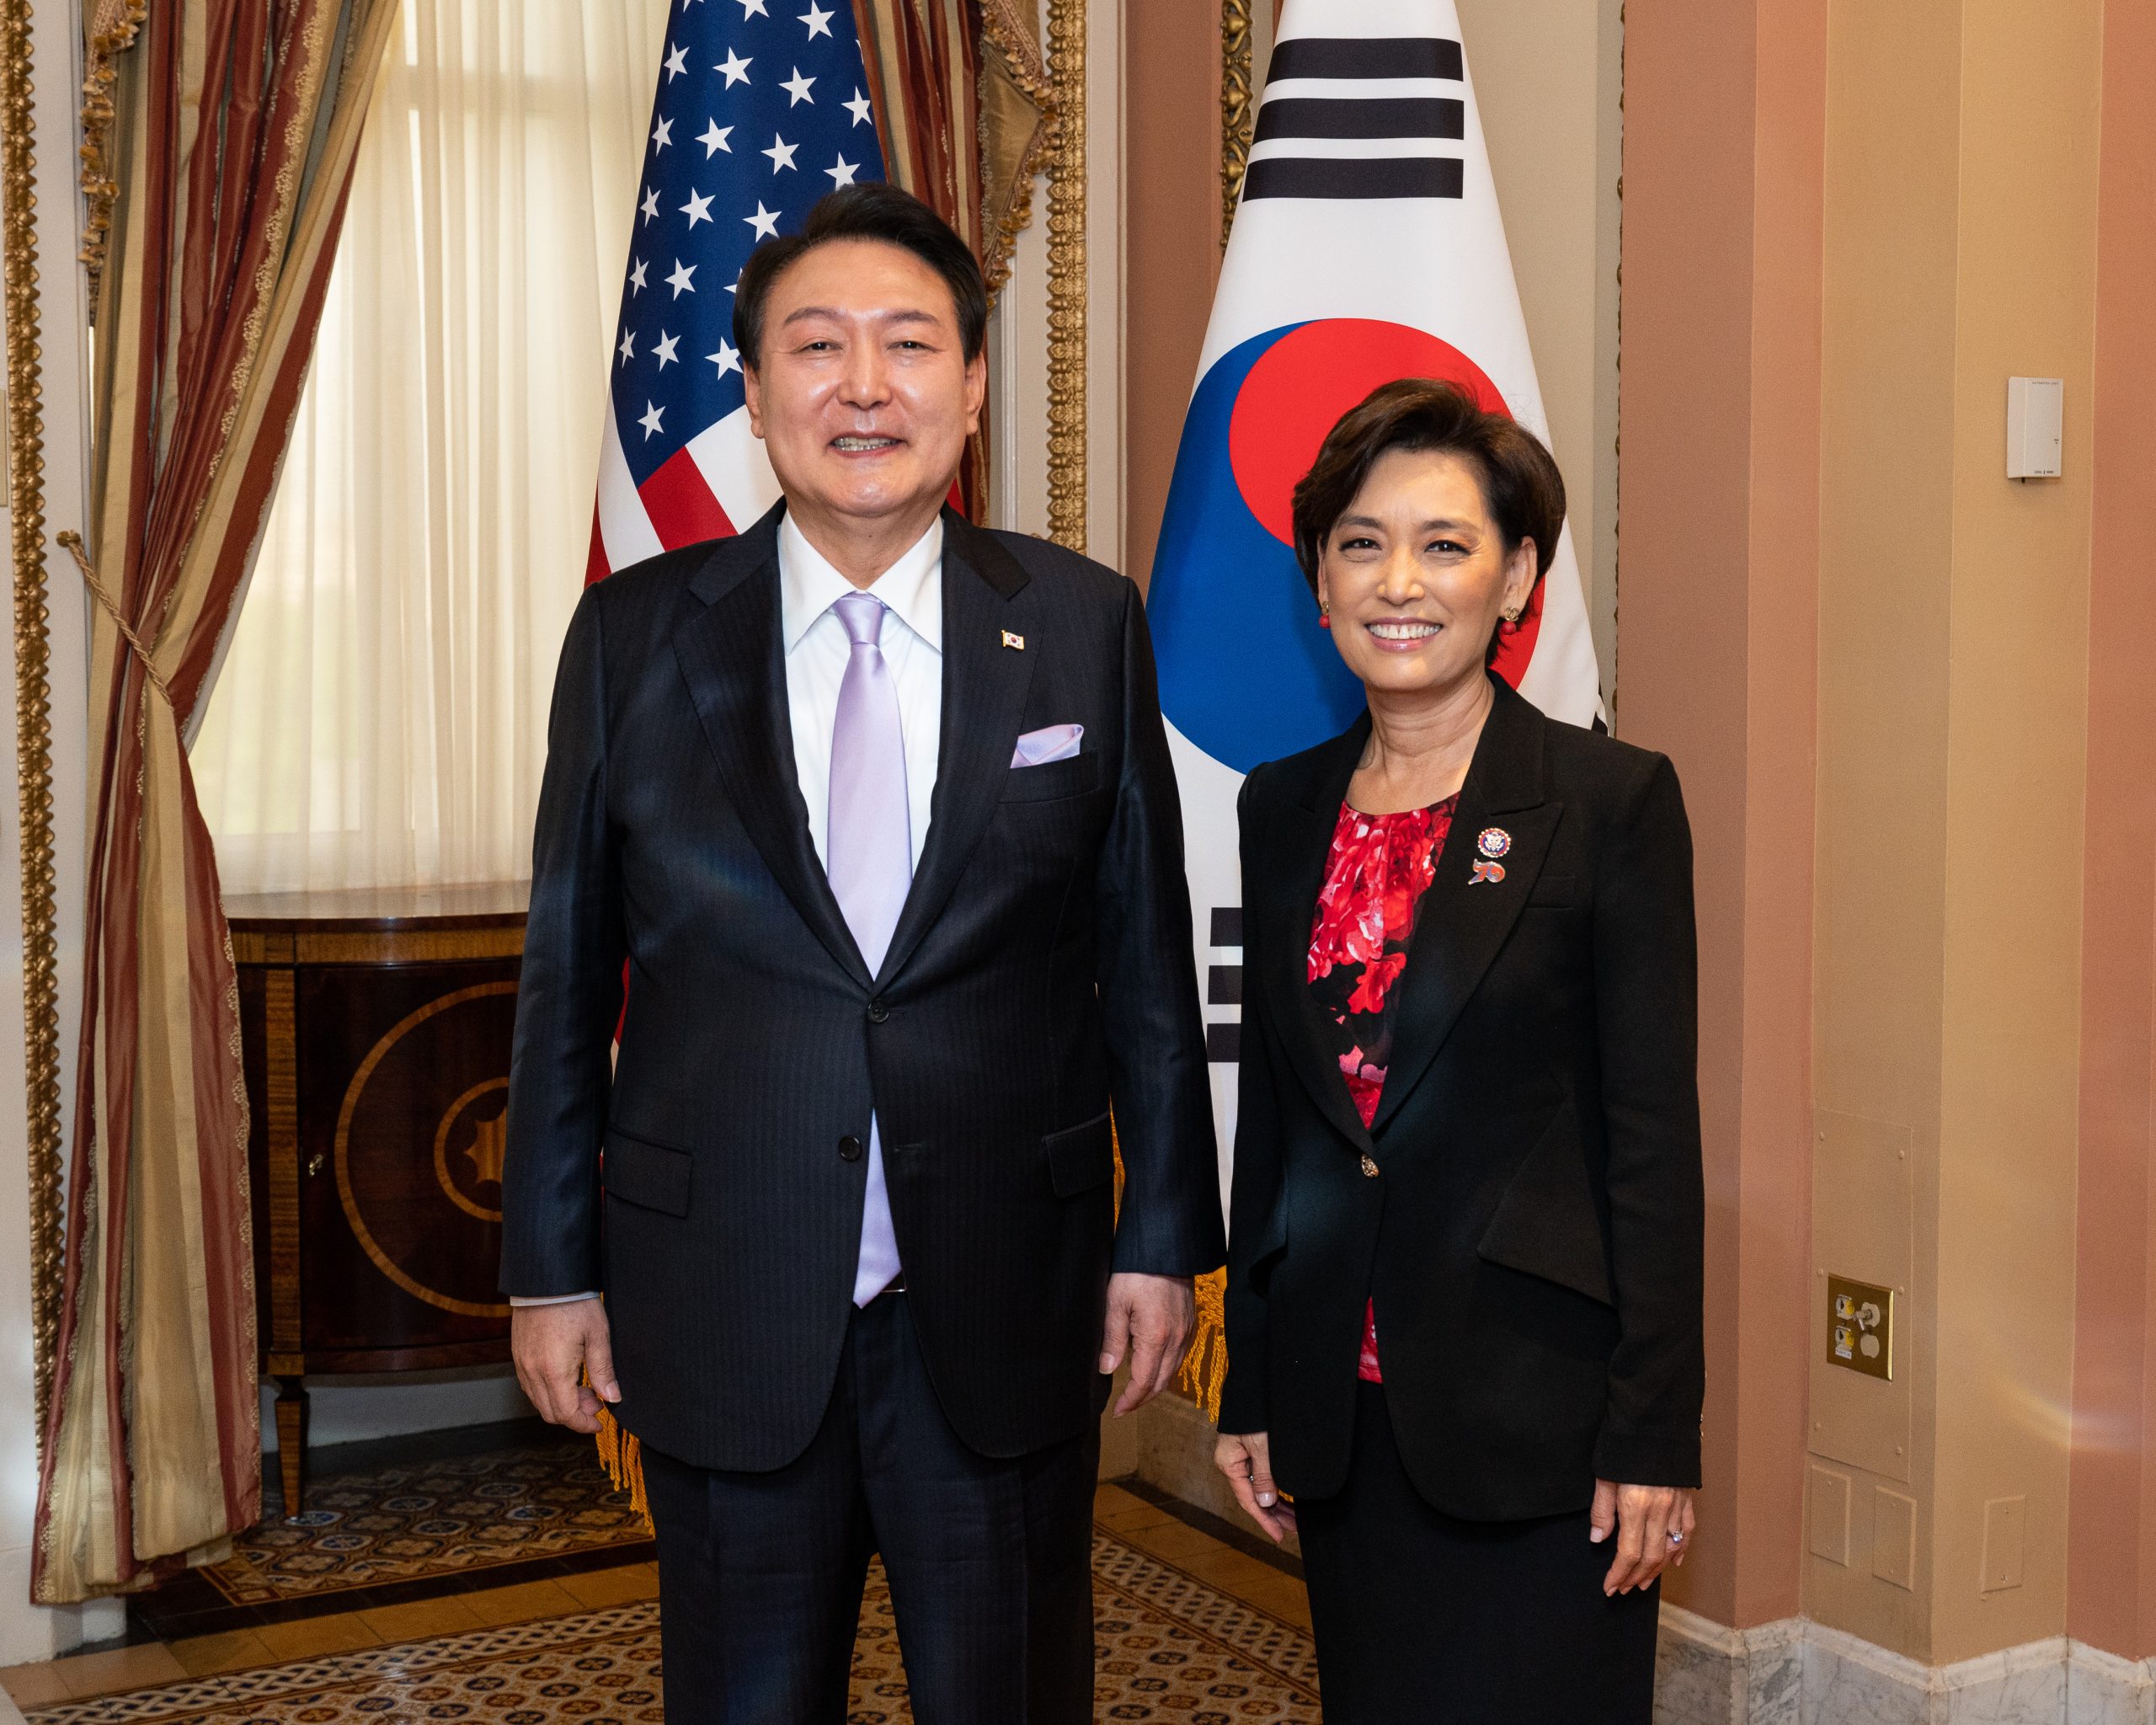 Rep. Young Kim With Yoon Suk Yeol, President of the Republic of Korea